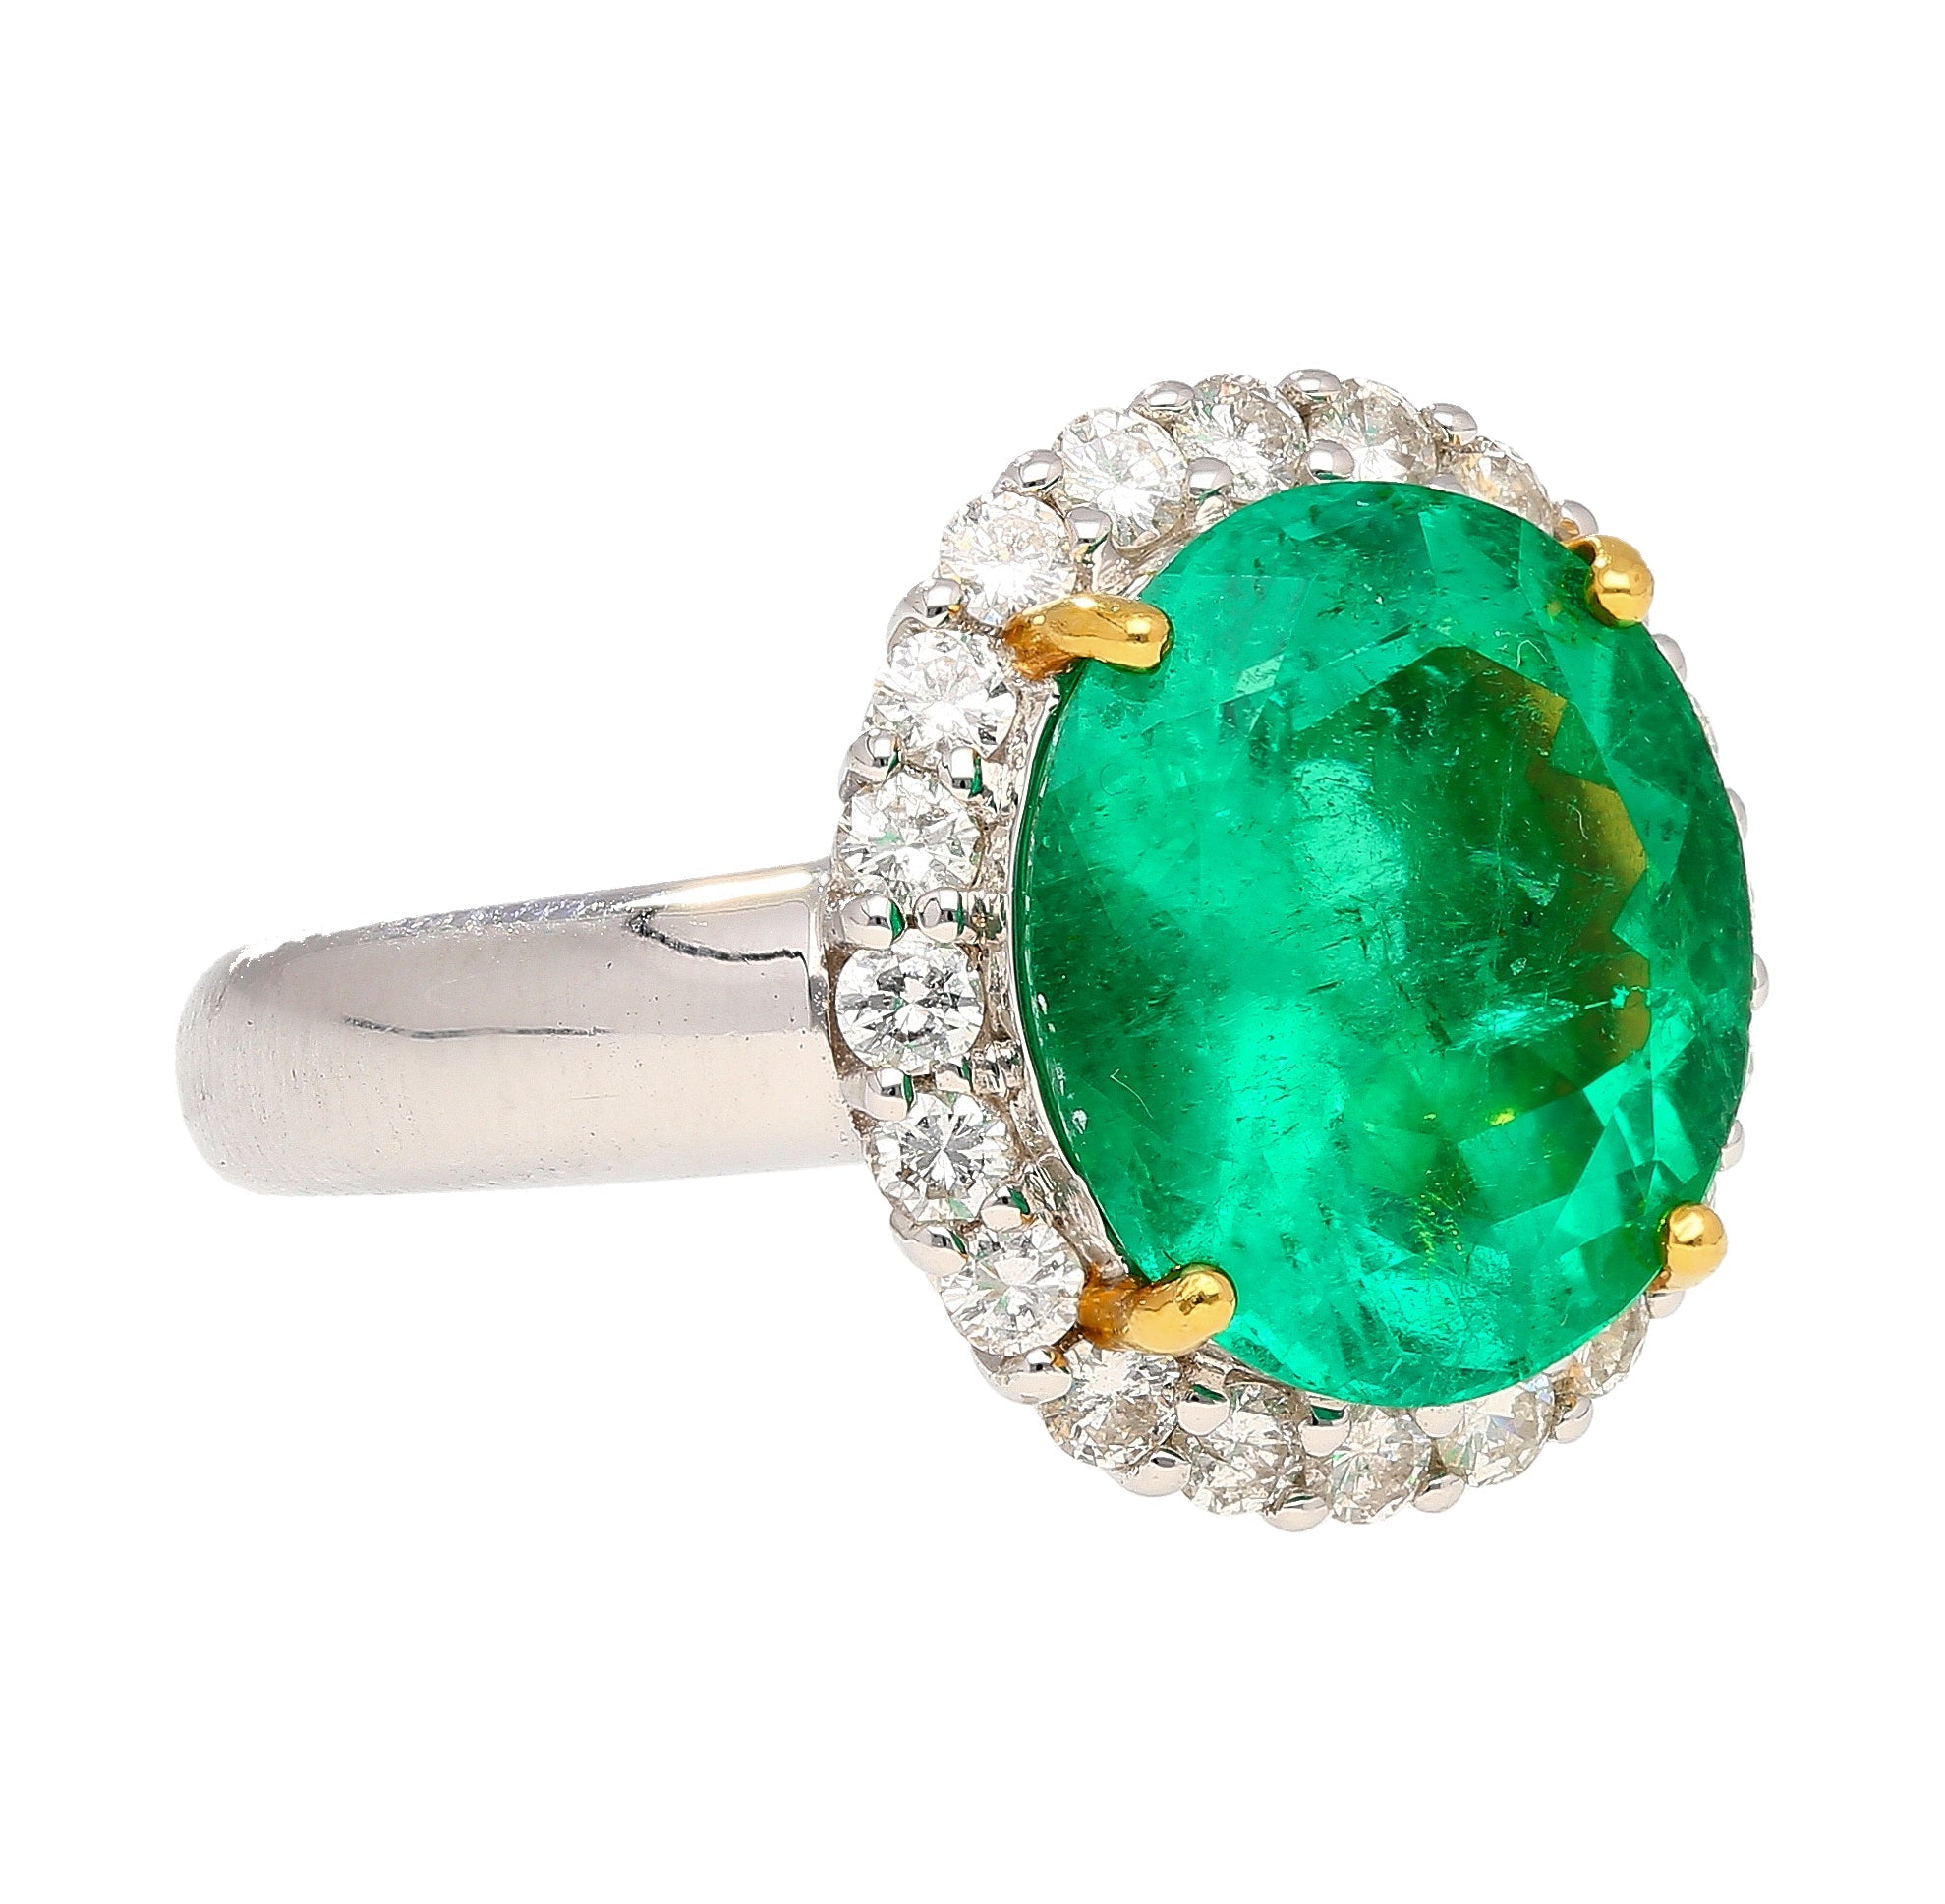 GRS Certified 5.03 Carat Oval Cut Minor Oil Colombian Emerald Ring with Diamond Halo in 18K White Gold